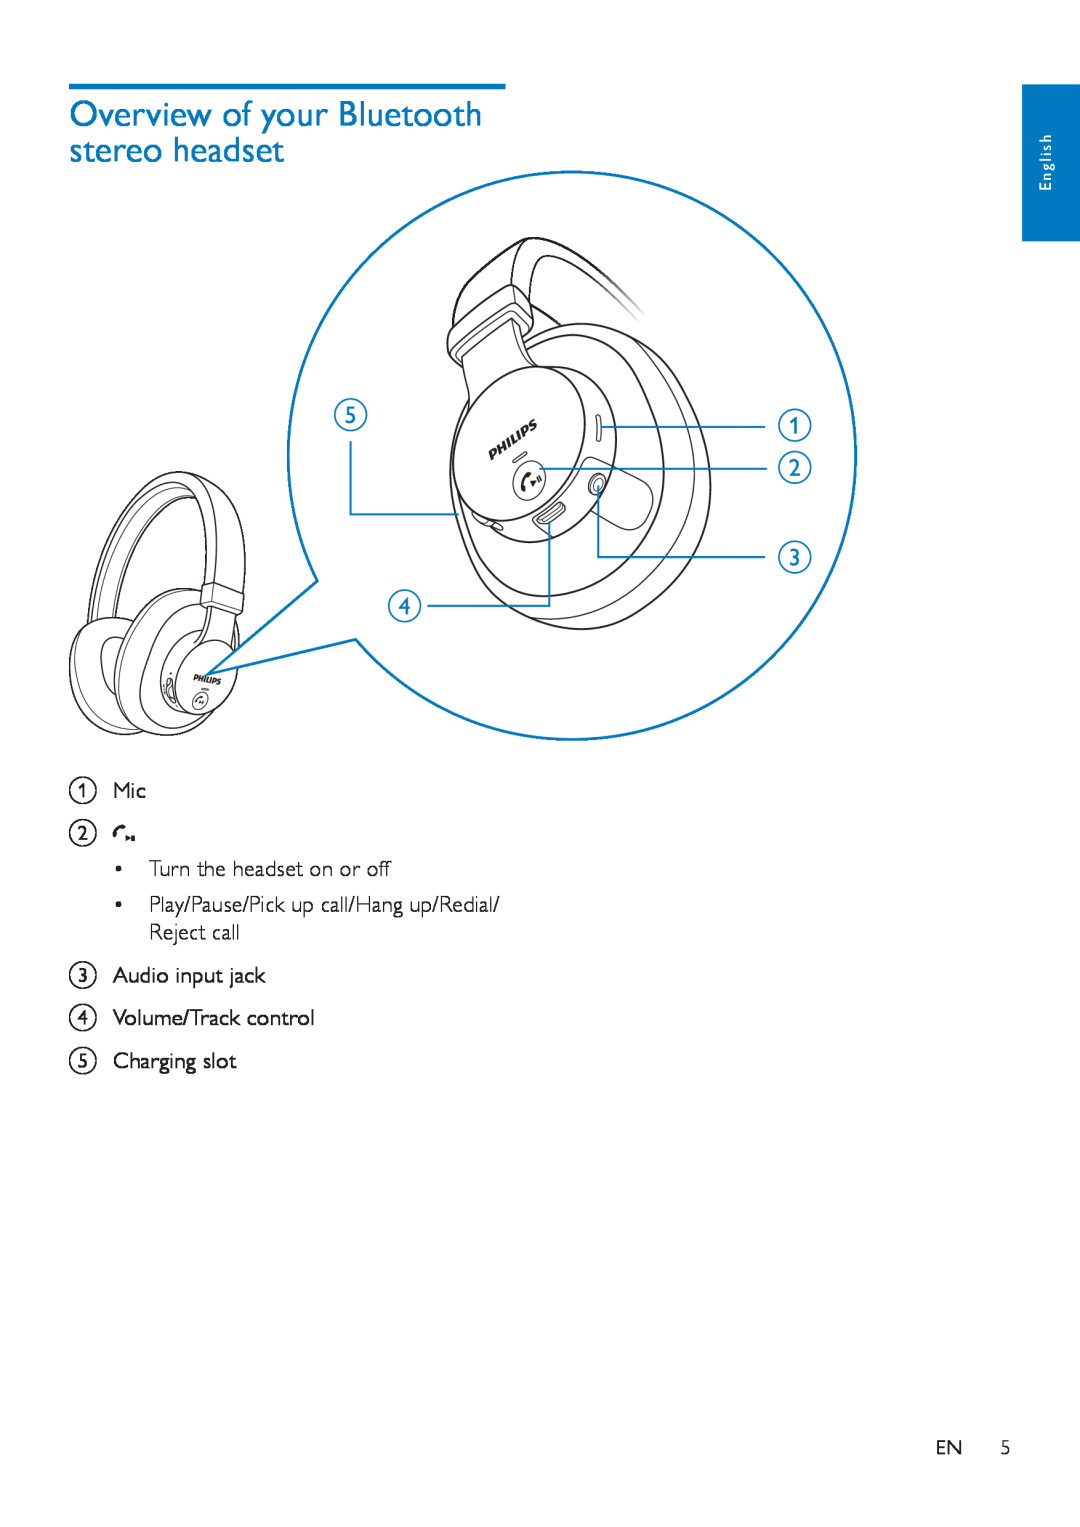 Philips SHB7000 Overview of your Bluetooth stereo headset, AMic, Turn the headset on or off, ECharging slot, E n g l i s h 